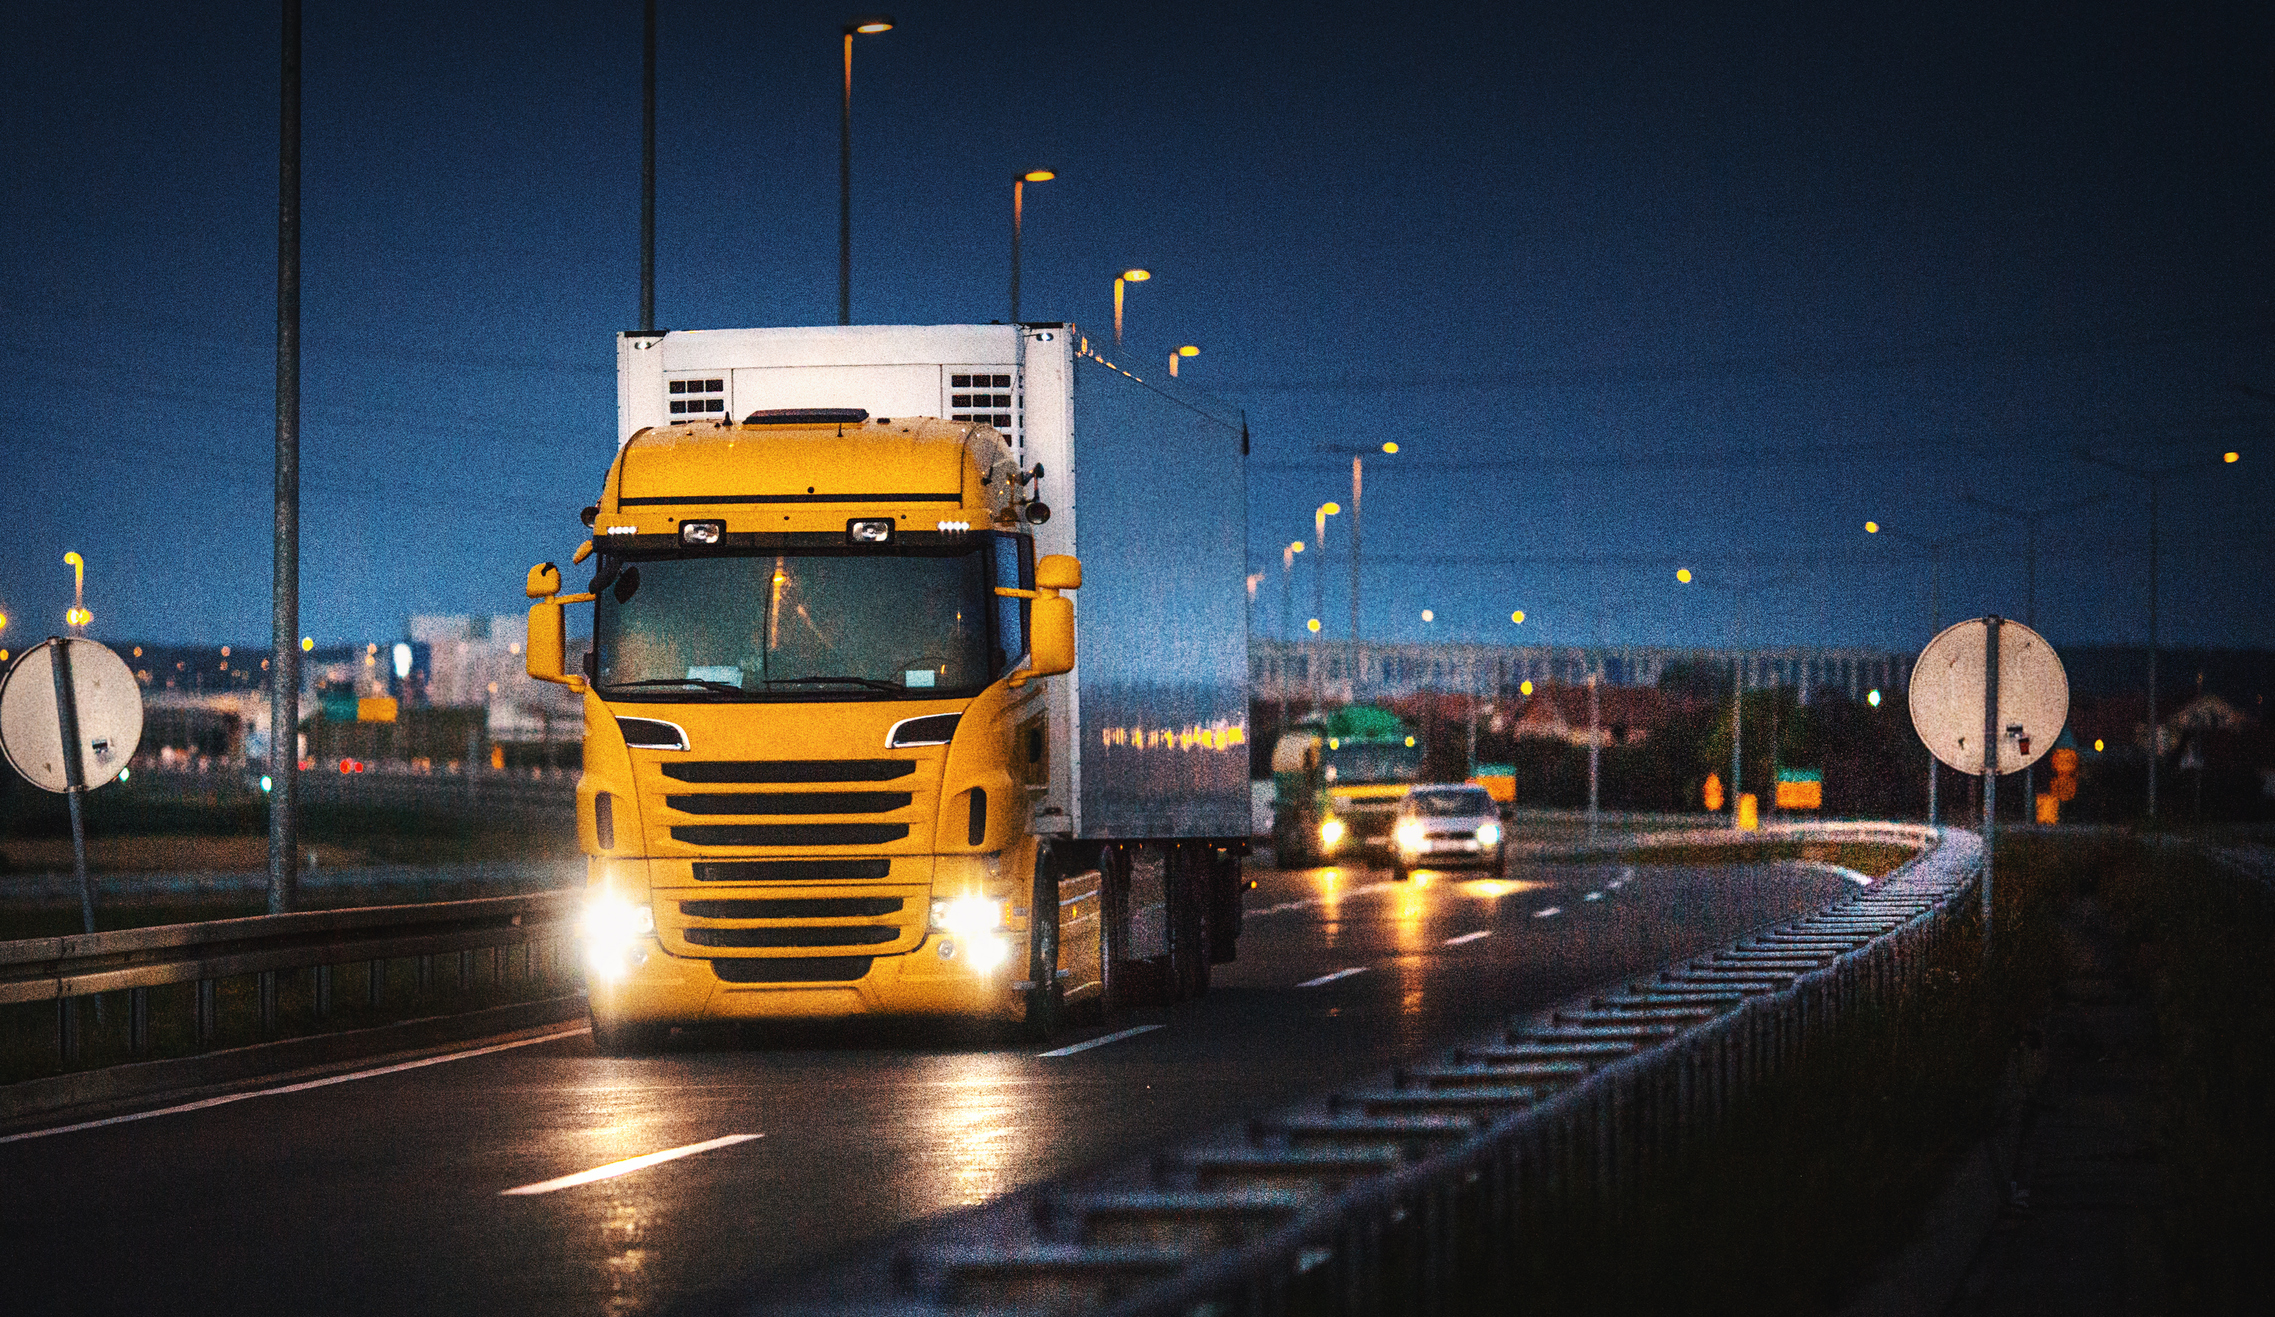 A yellow cargo truck driving on a highway at late sunset